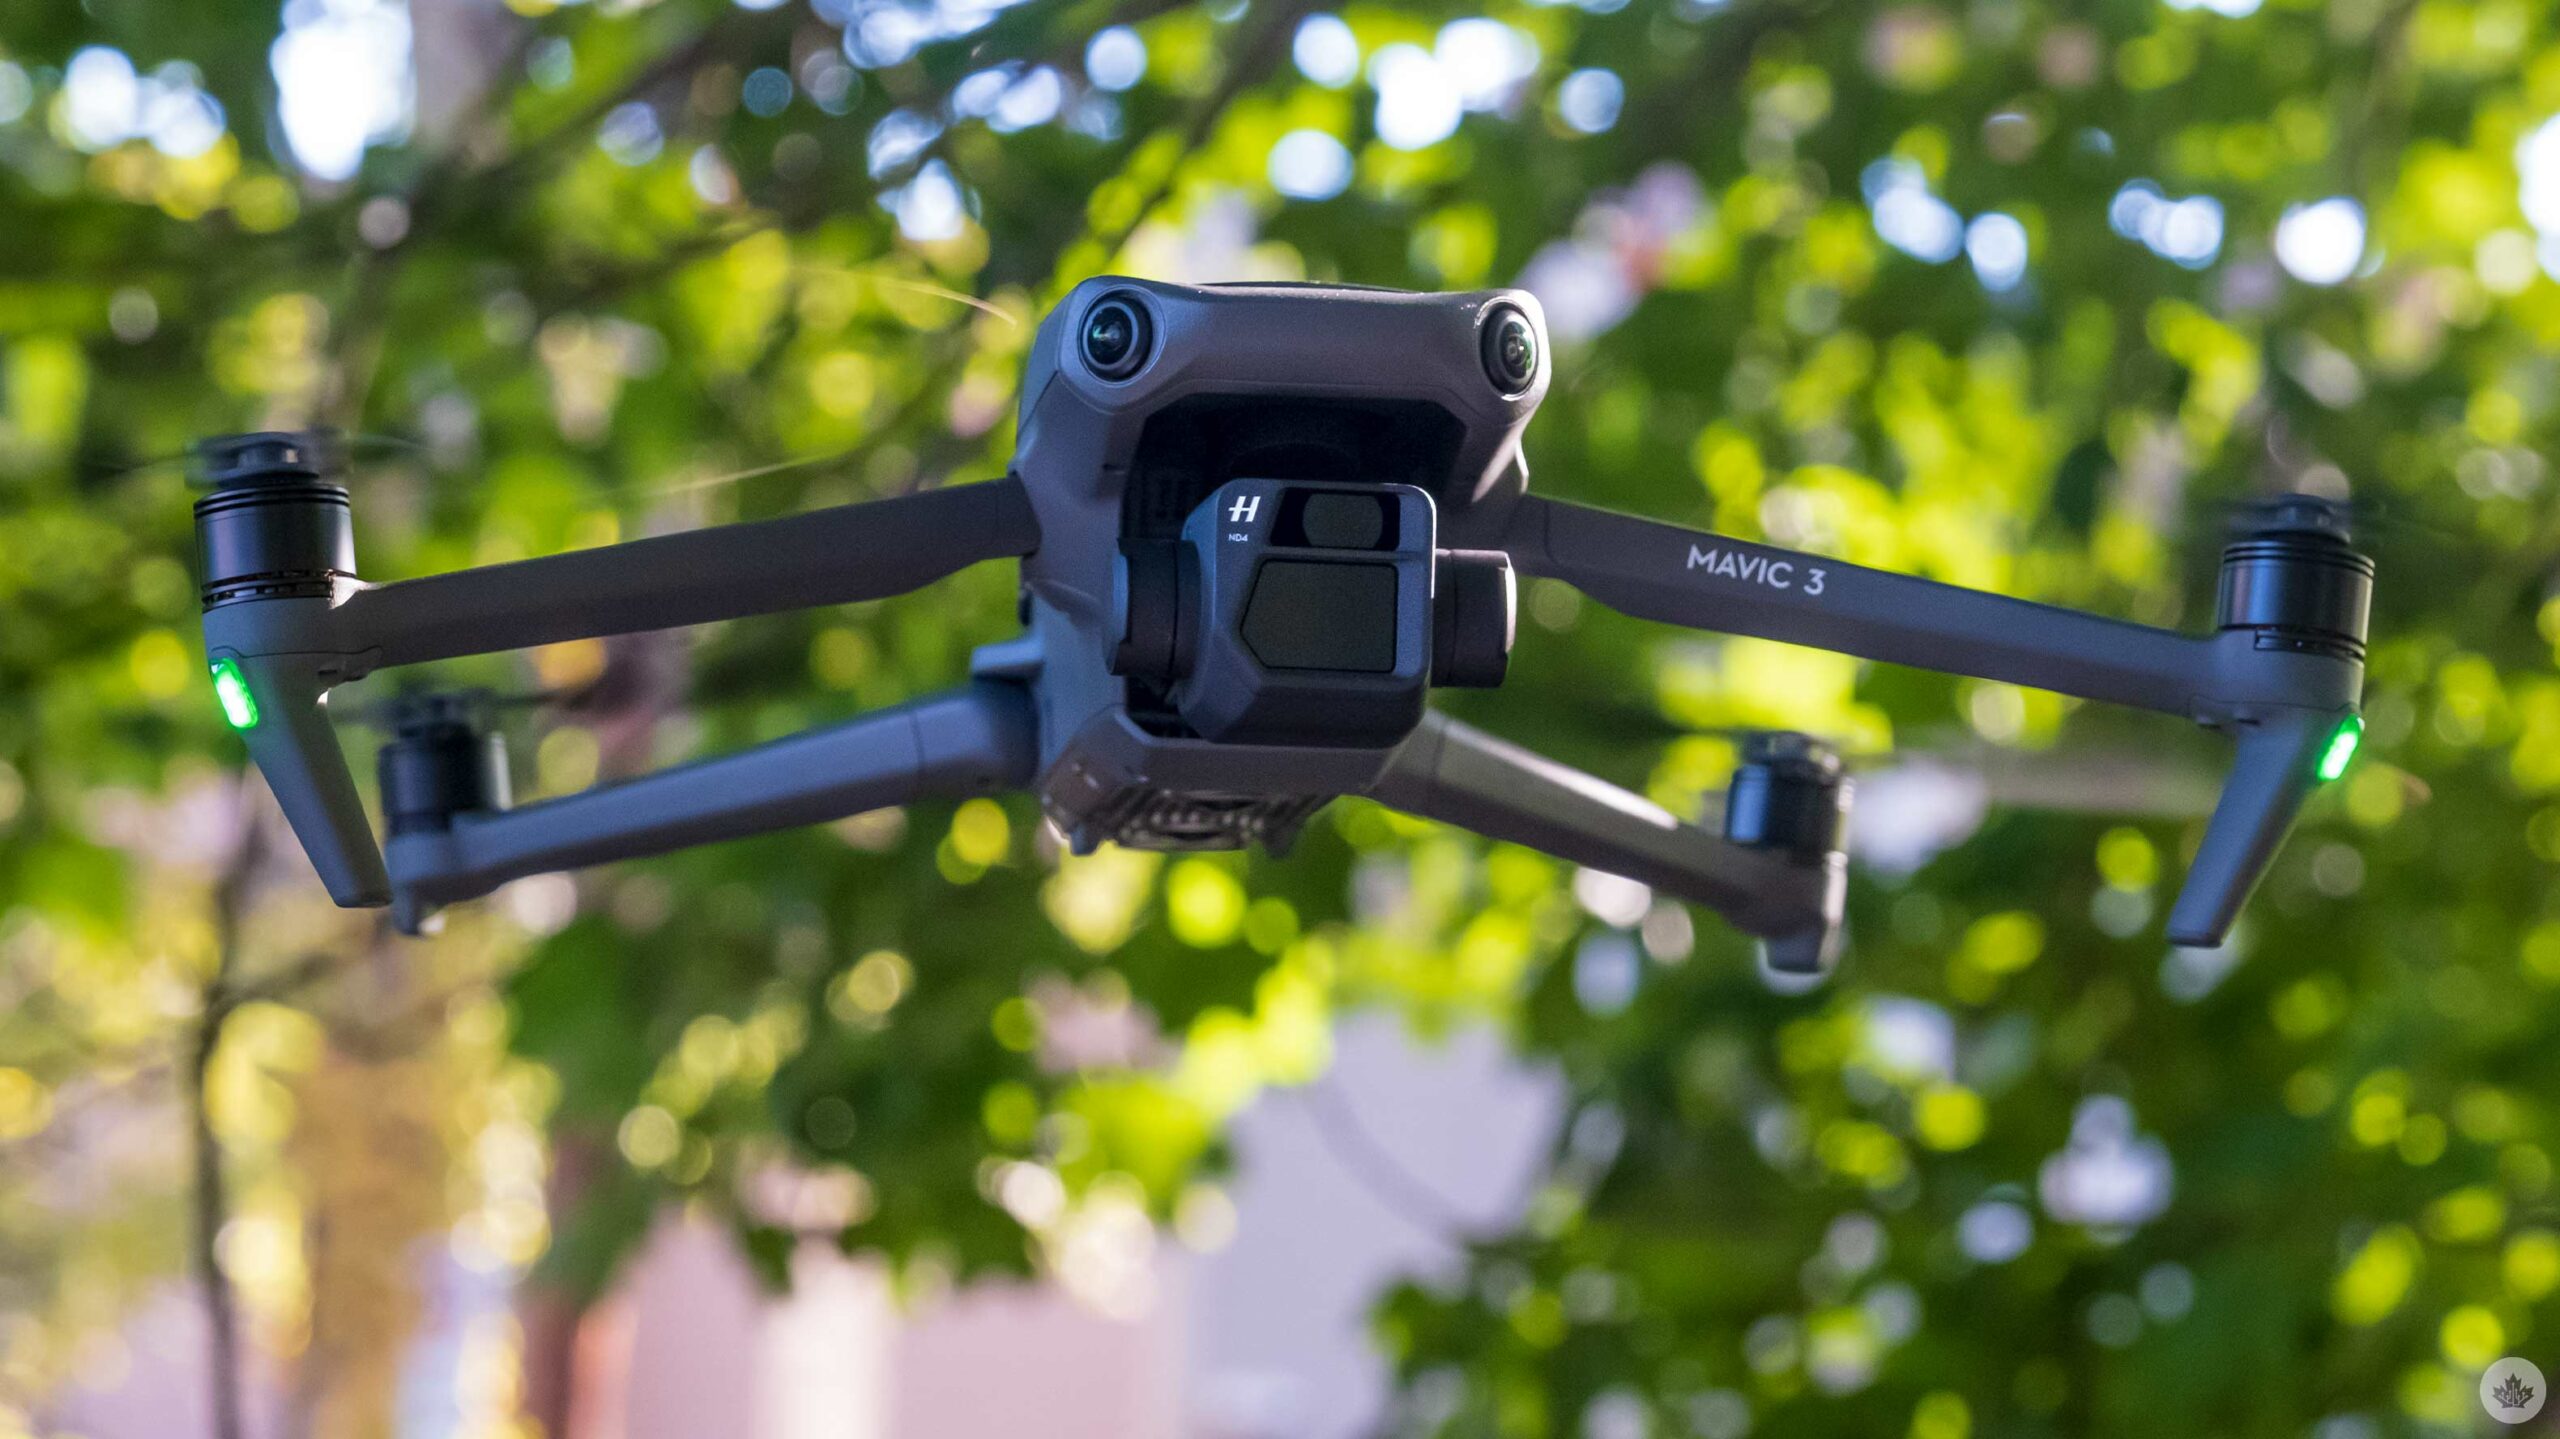 DJI's new Mavic 3 features two cameras and nearly every feature imaginable  – MobileSyrup